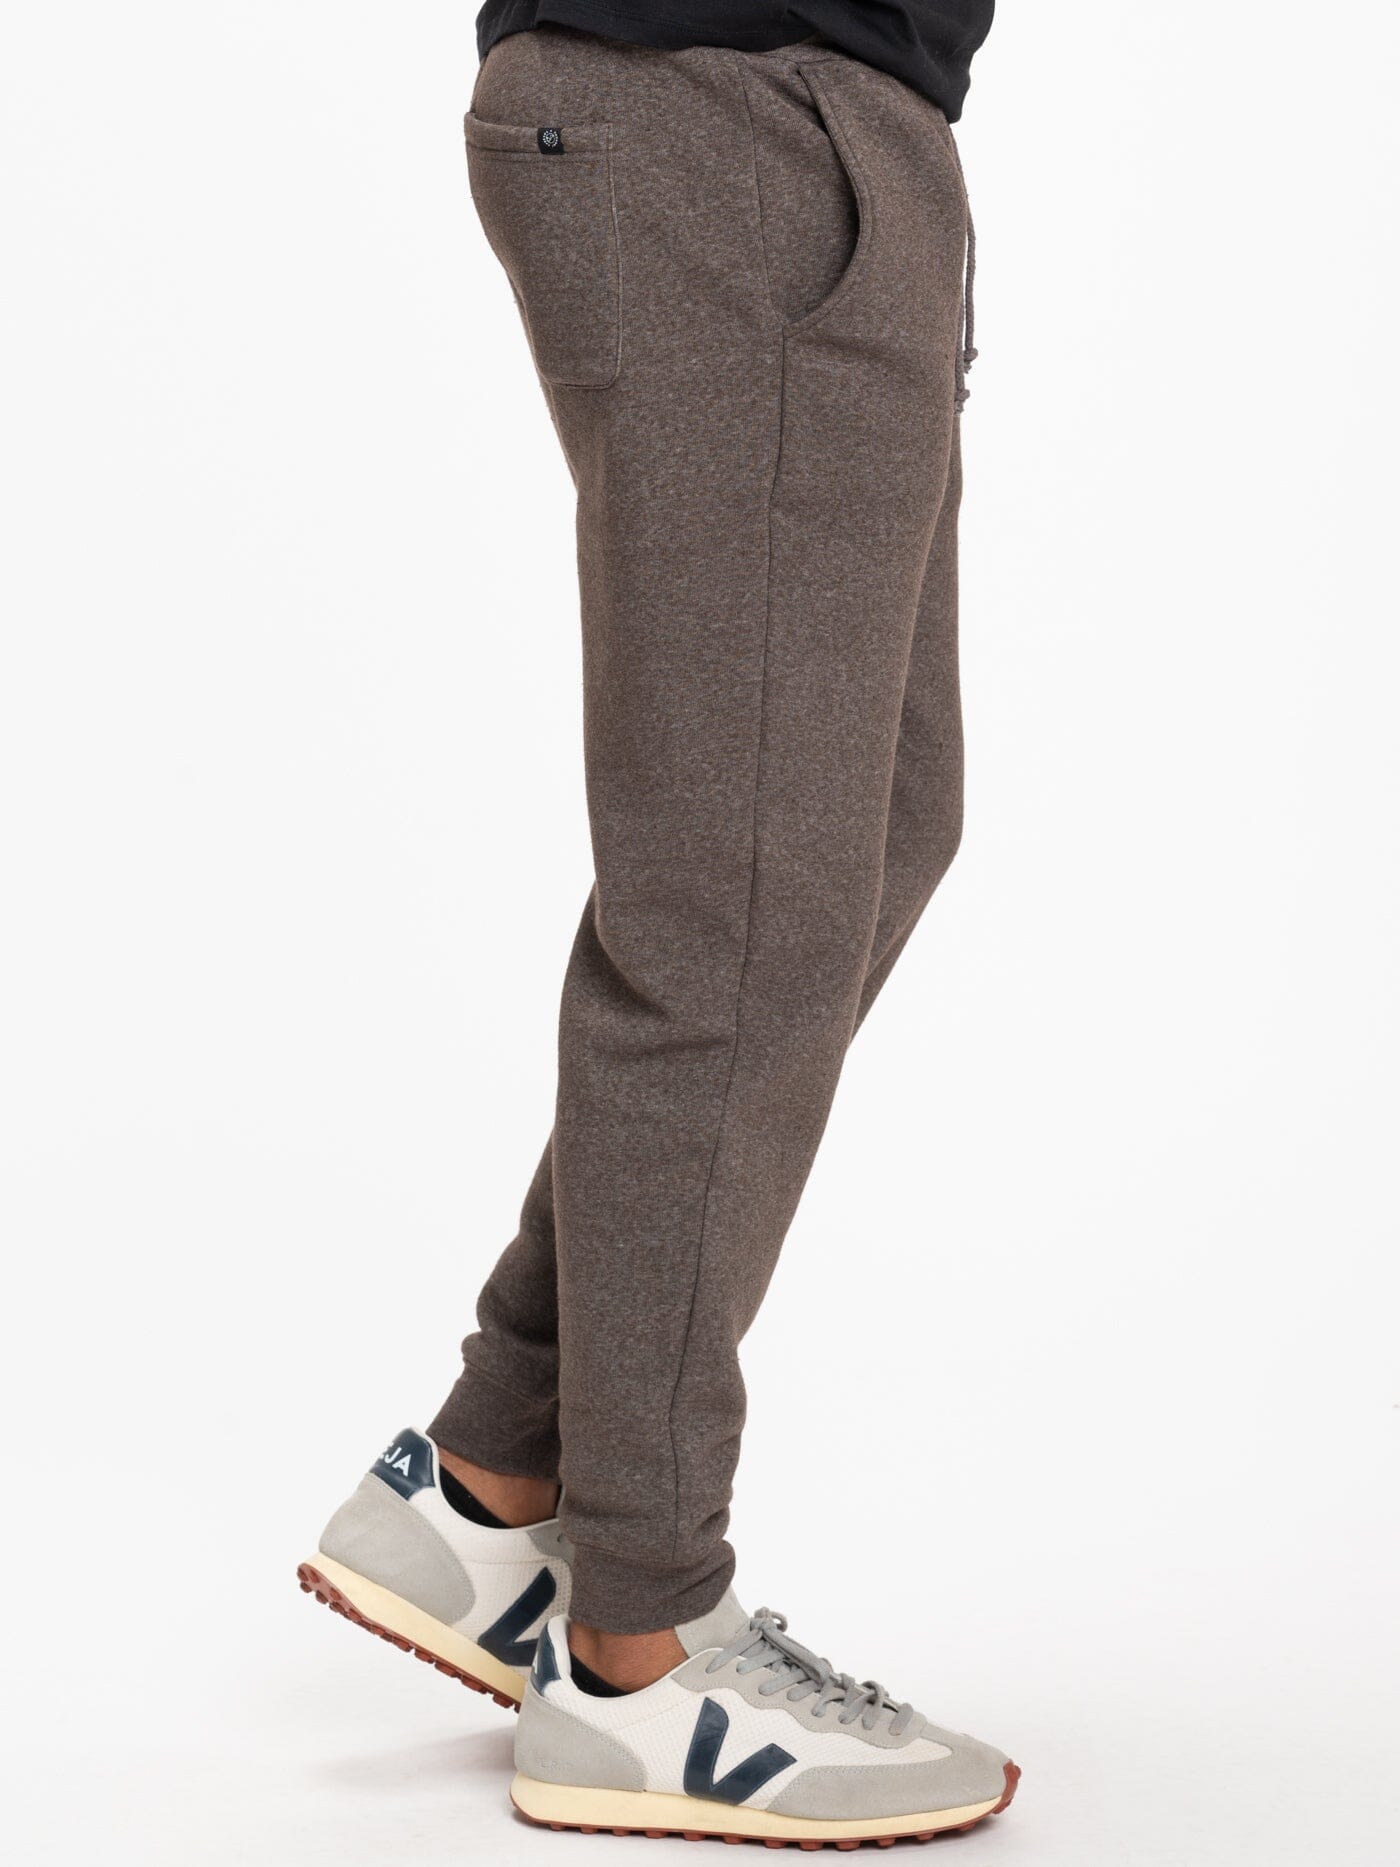 Triblend Fleece Jogger in Heather Grey – Threads 4 Thought